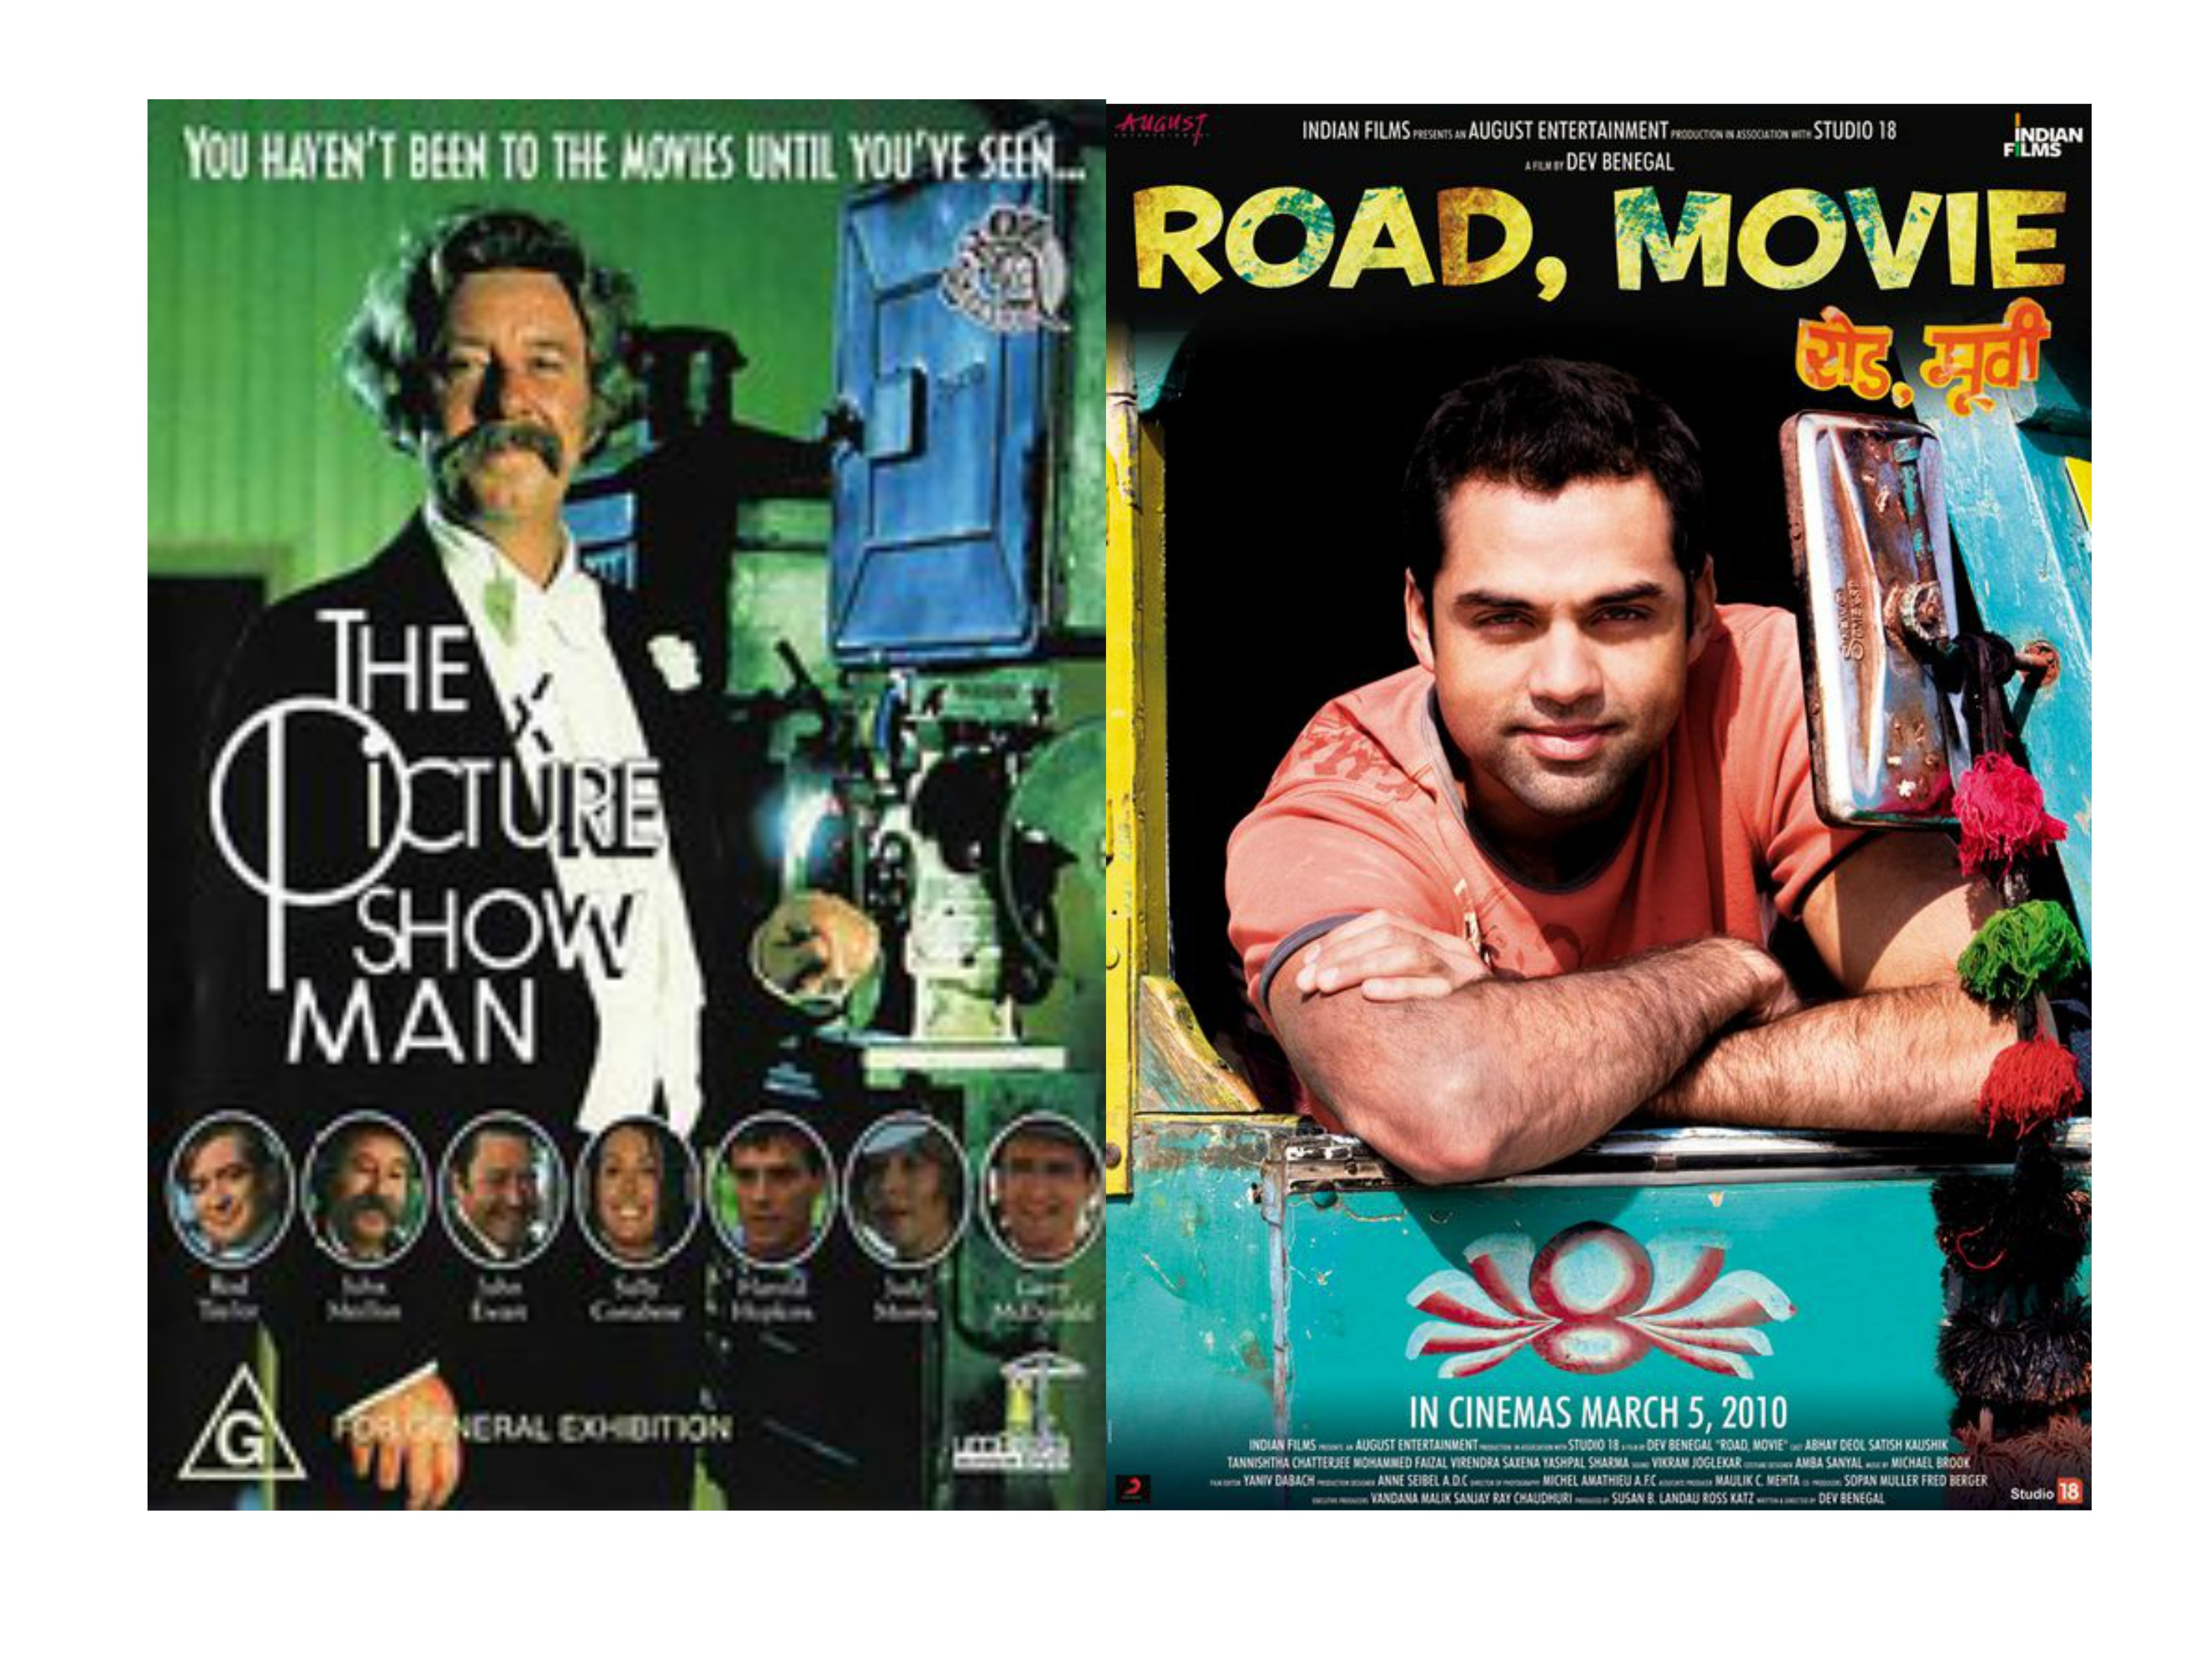 The Picture Show Man (1977) and Road, Movie (2009)